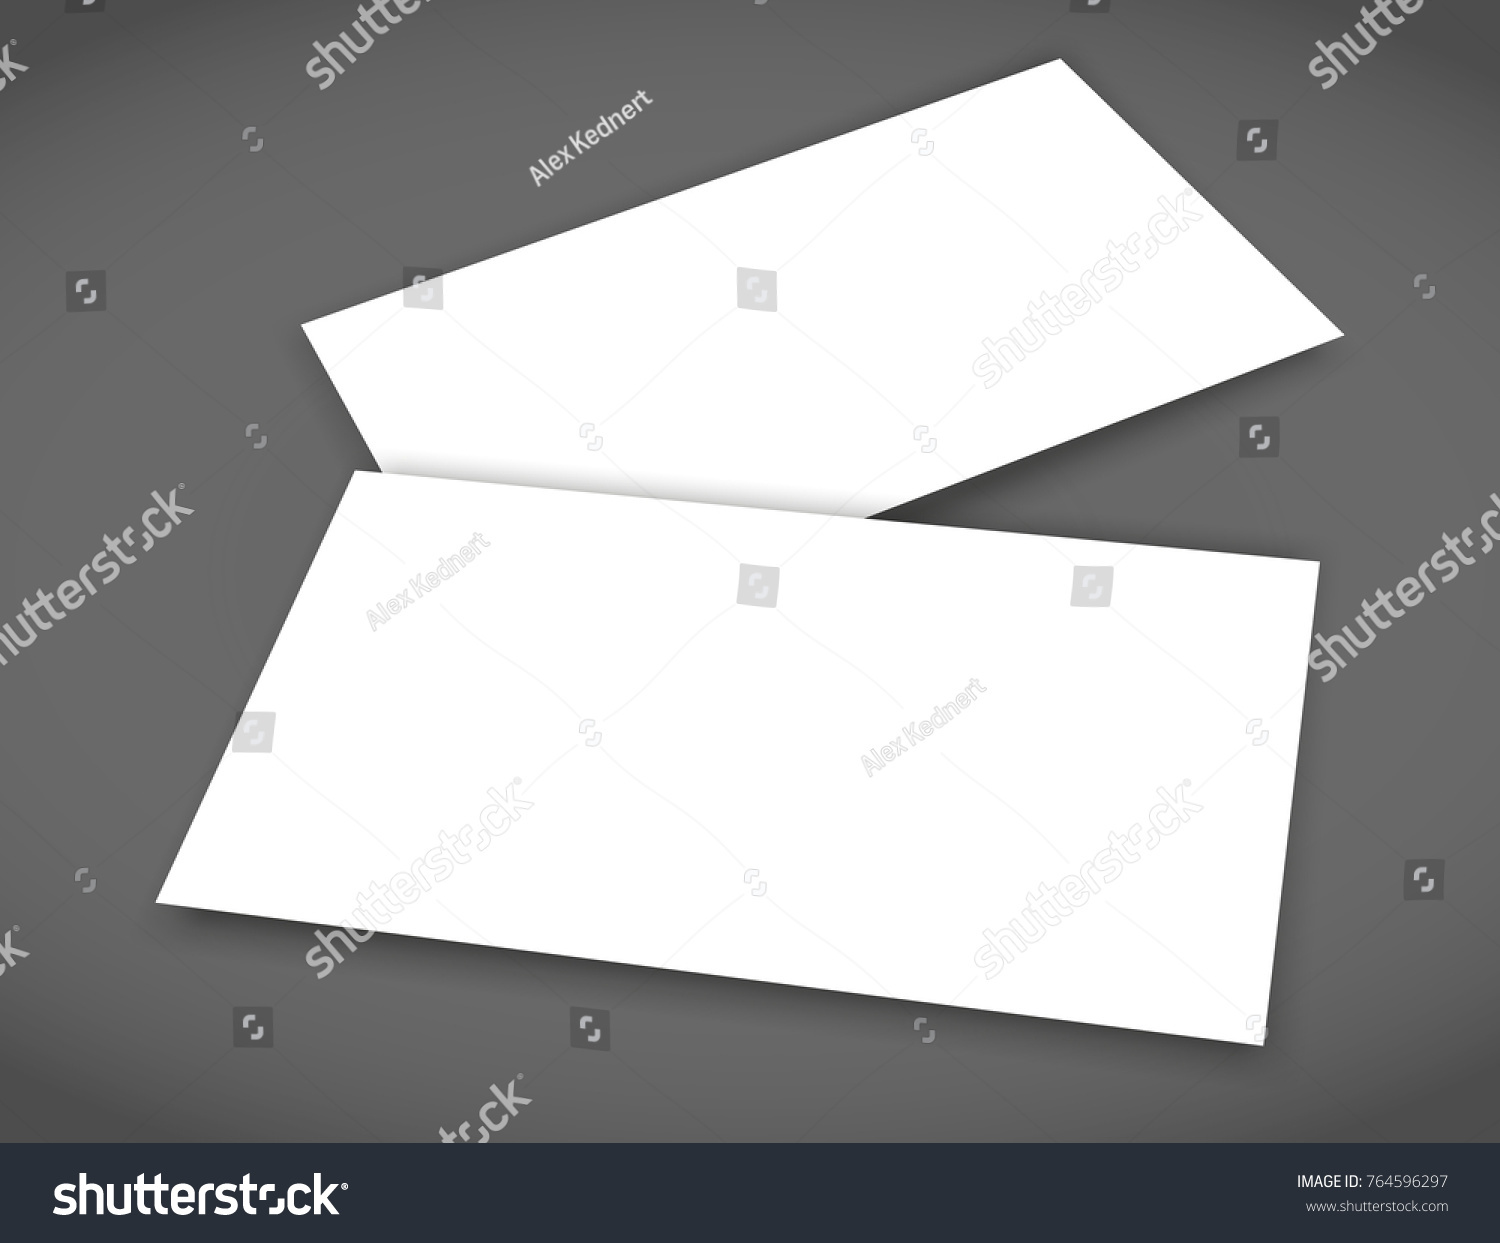 Download Two Business Card Shadow Mockup Cover Stock Vector Royalty Free 764596297 PSD Mockup Templates